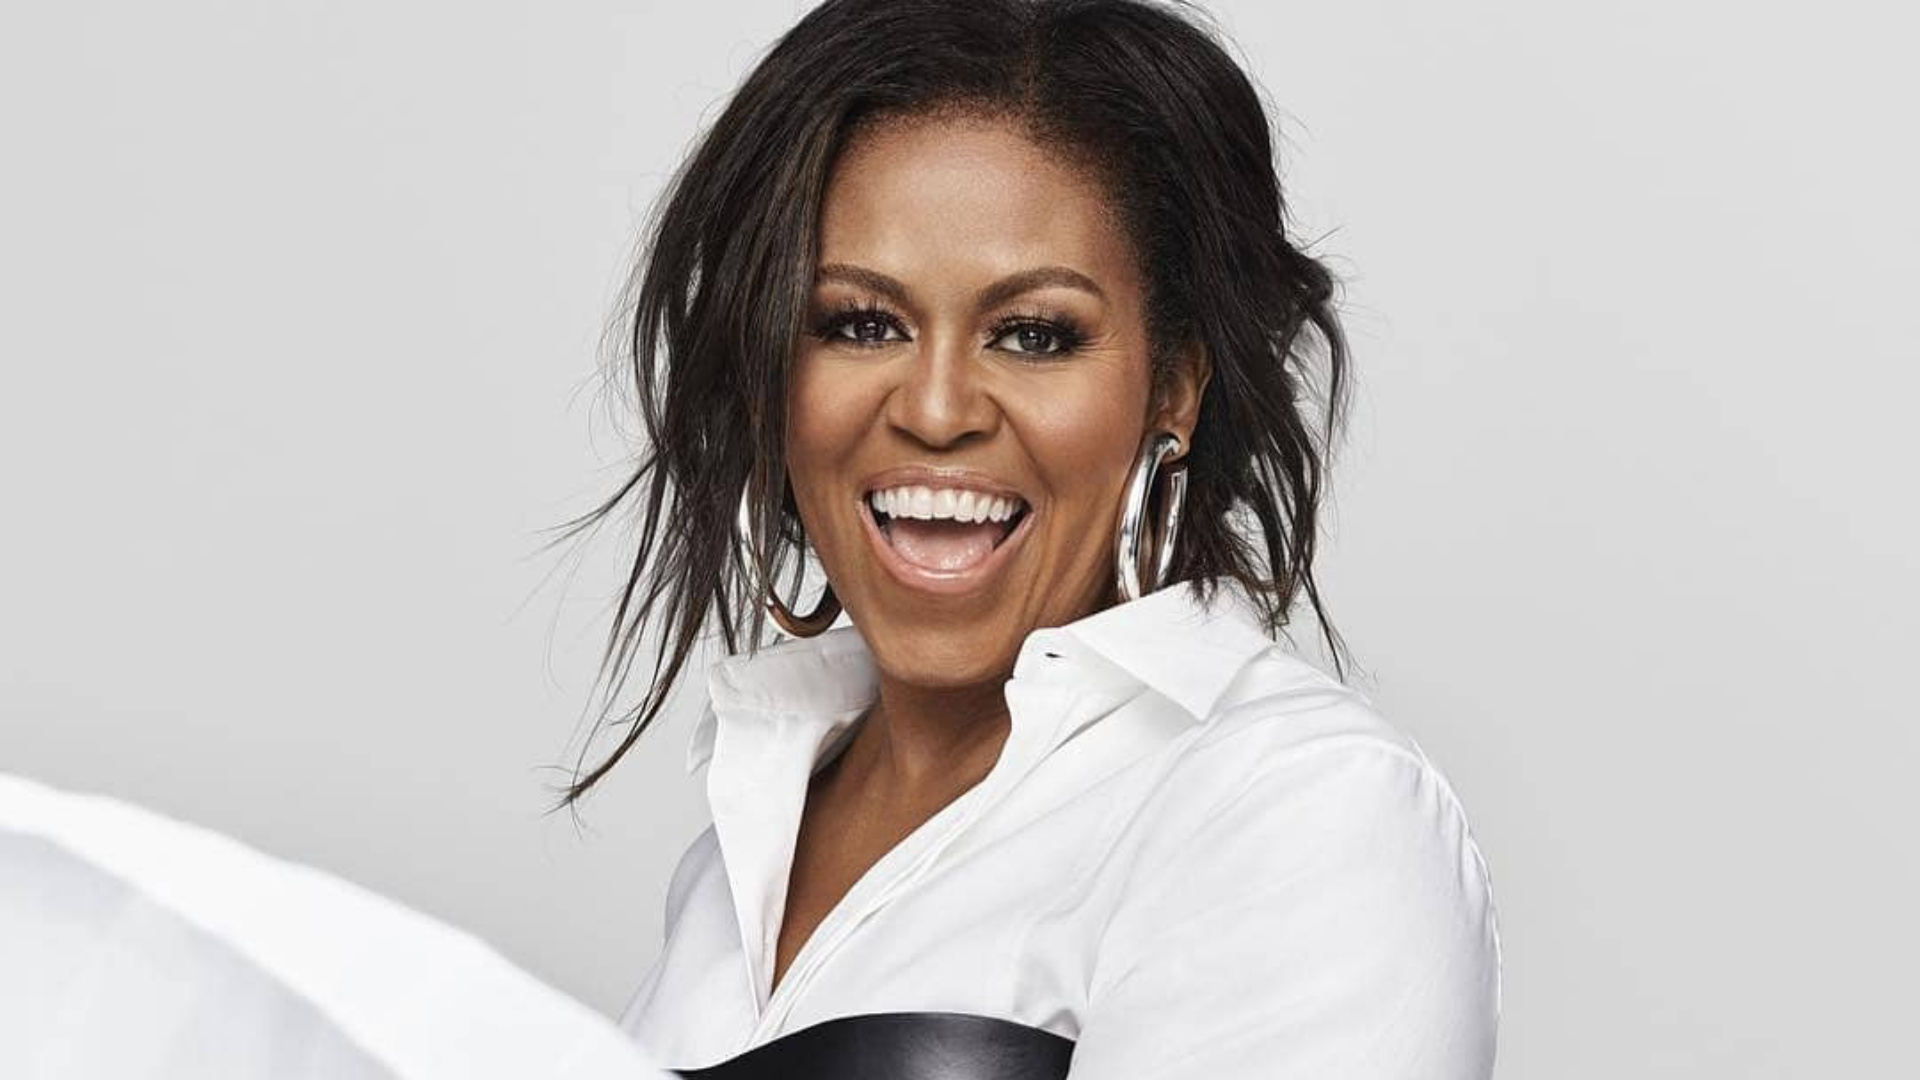 Michelle Obama: Obama's memoir, Becoming, the best-selling book of 2018. 1920x1080 Full HD Background.